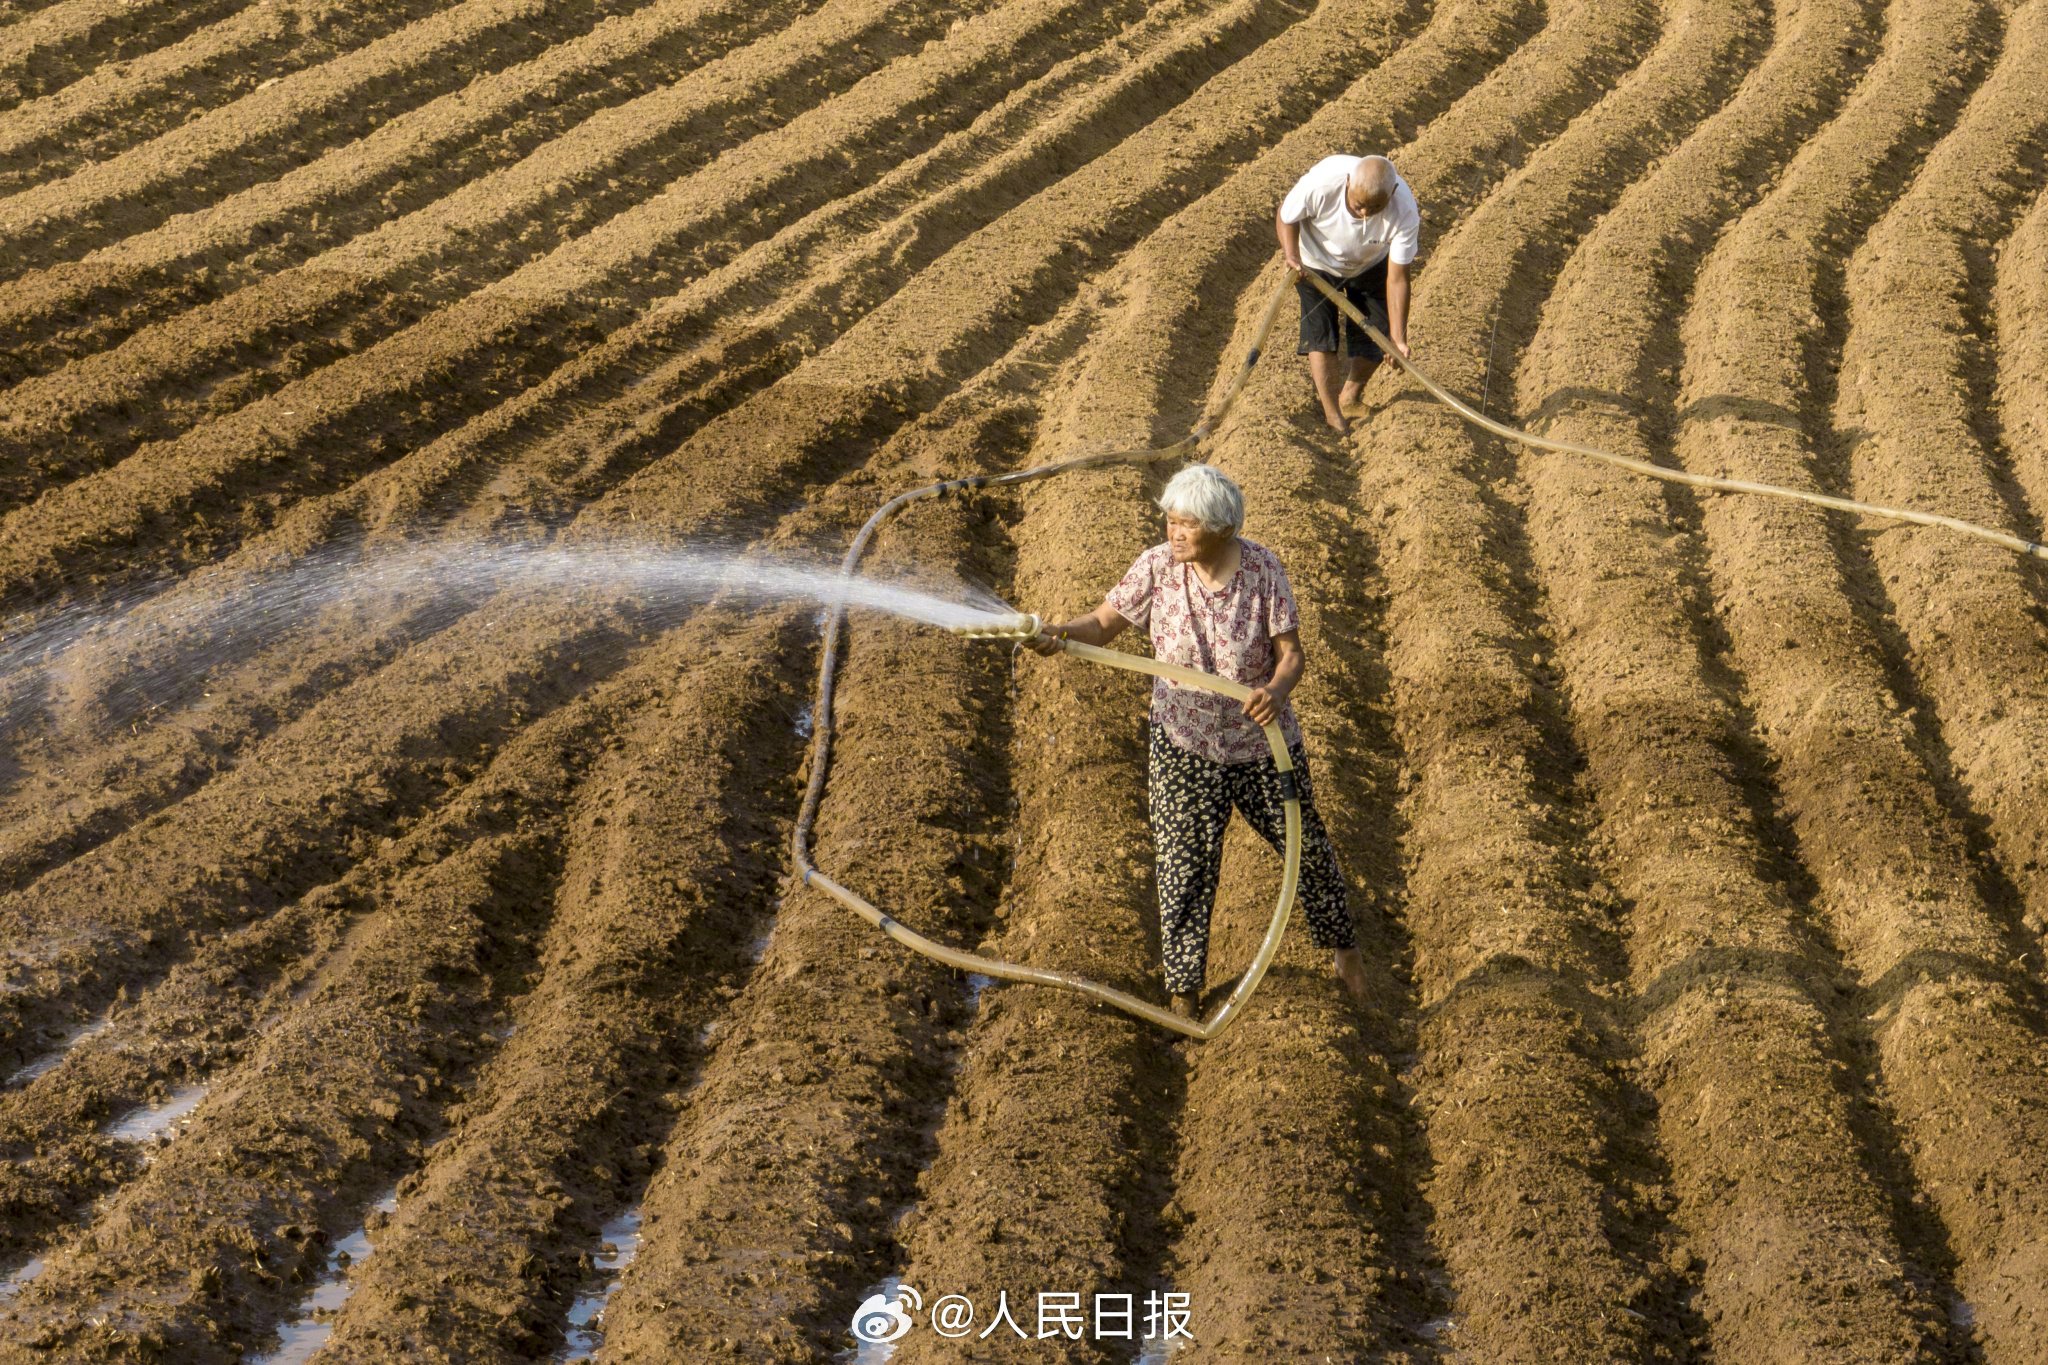 China has sent emergency task forces to help with drought relief in Shandong and Henan. The Ministry of Emergency Management stressed water must be ensured for crops. Photo: Weibo/人民日报